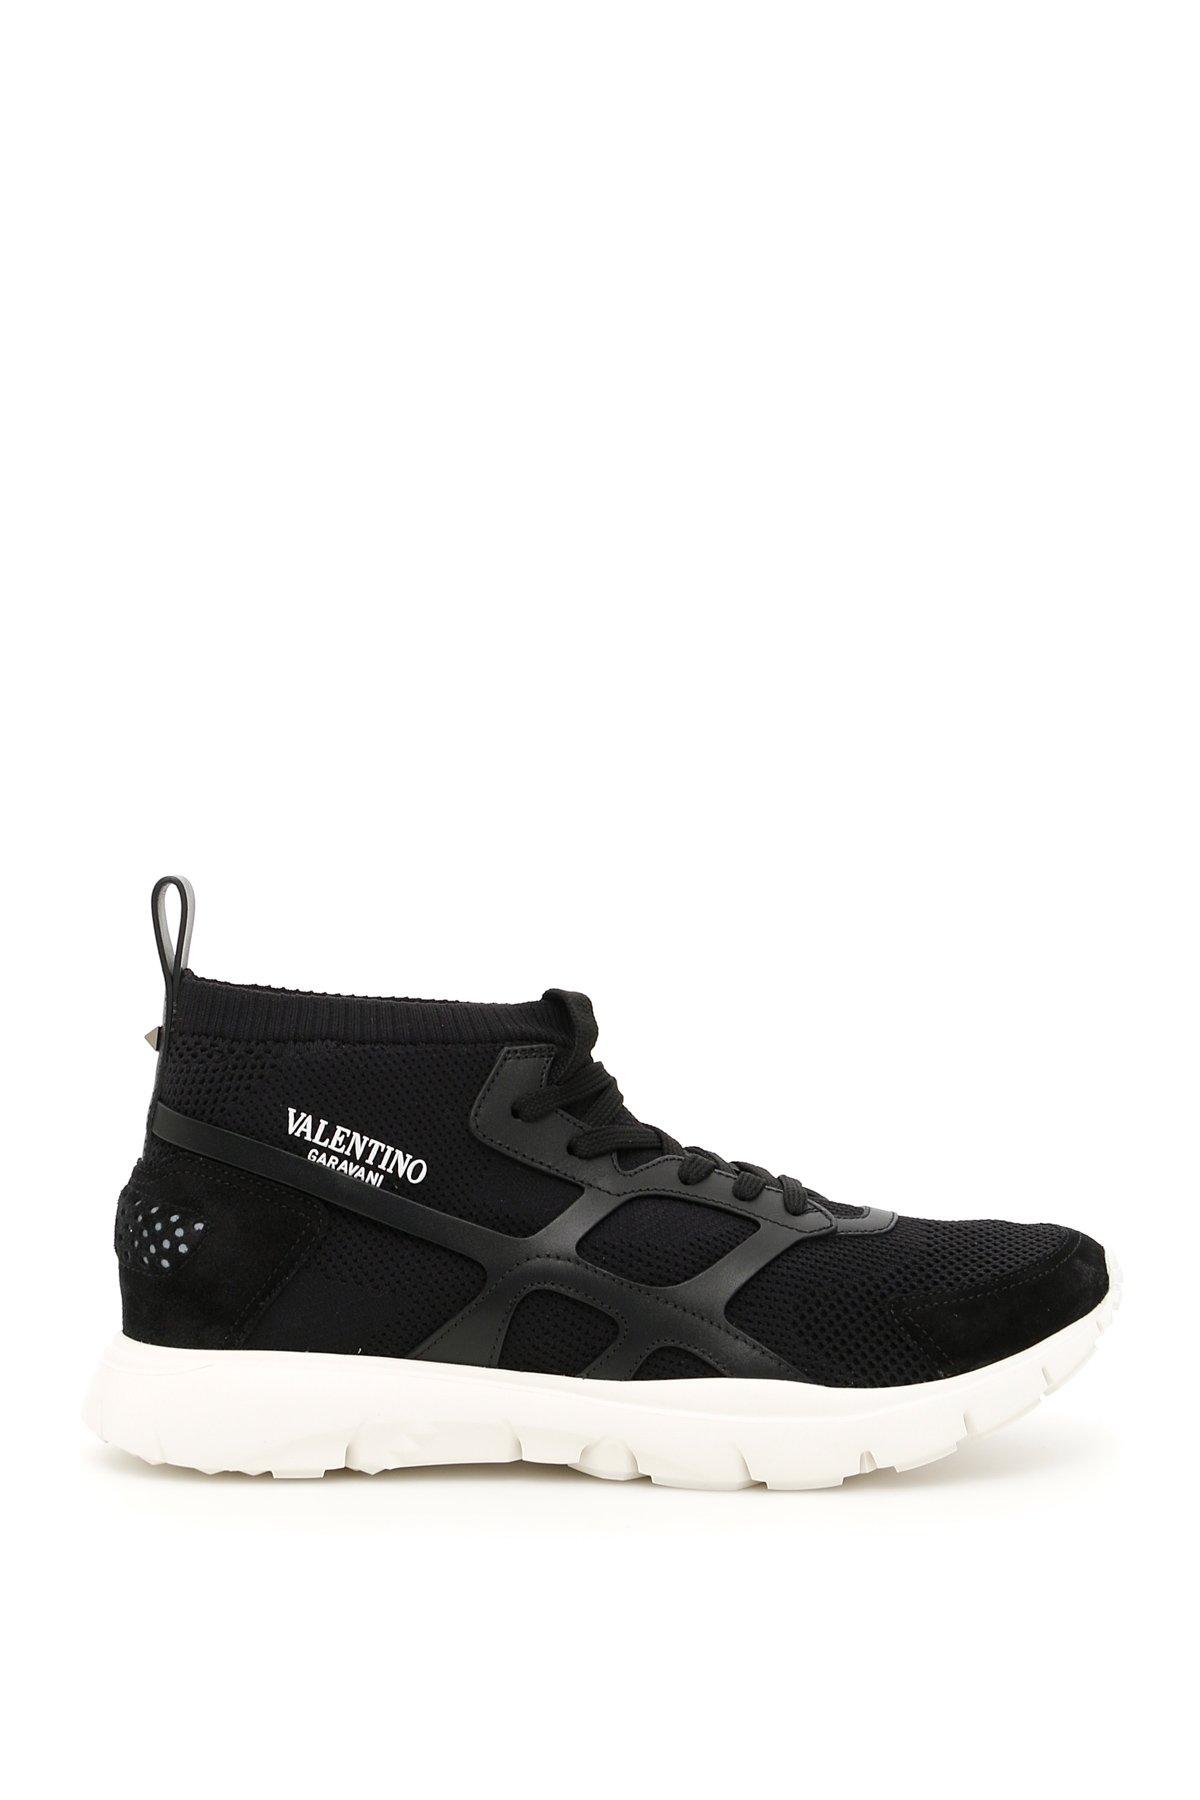 Valentino Leather Sound High Top Trainers in Nero (Black) for Men - Lyst